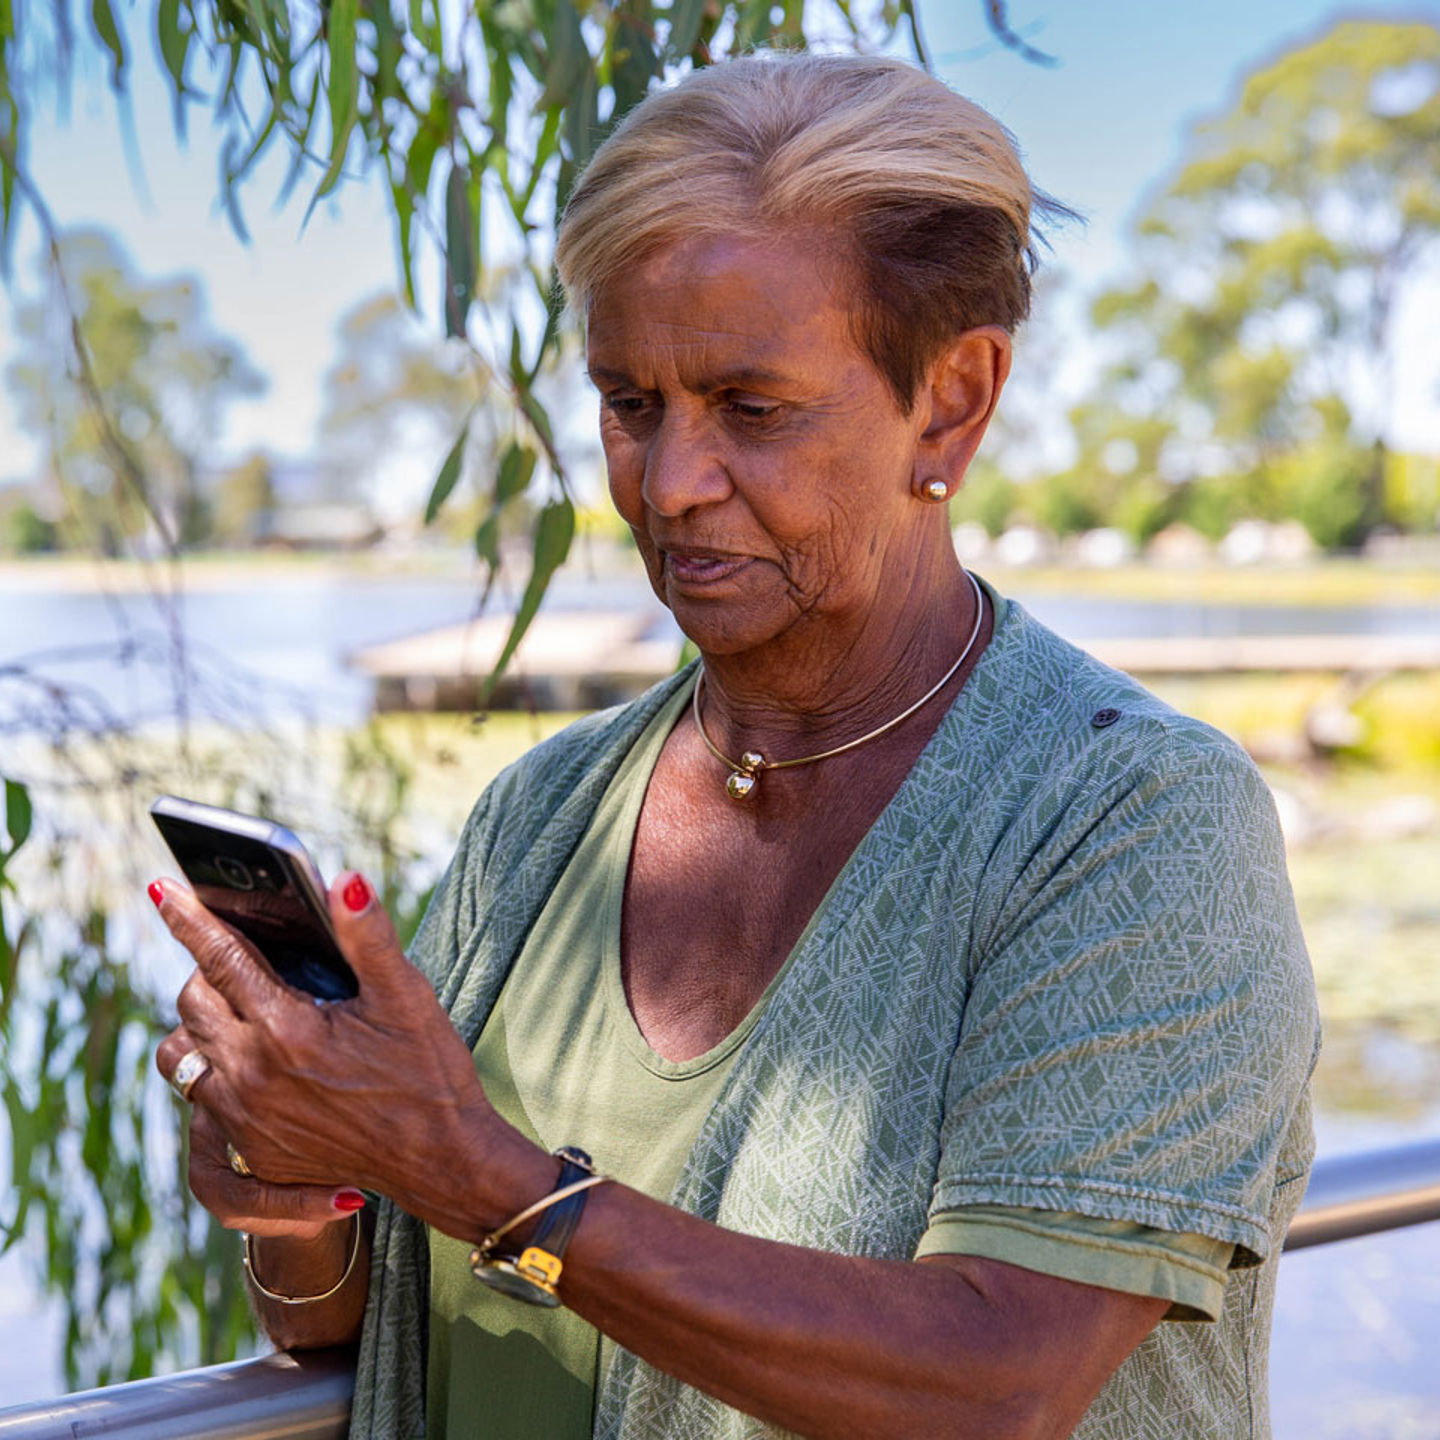 Woman standing by a pond holding her phone